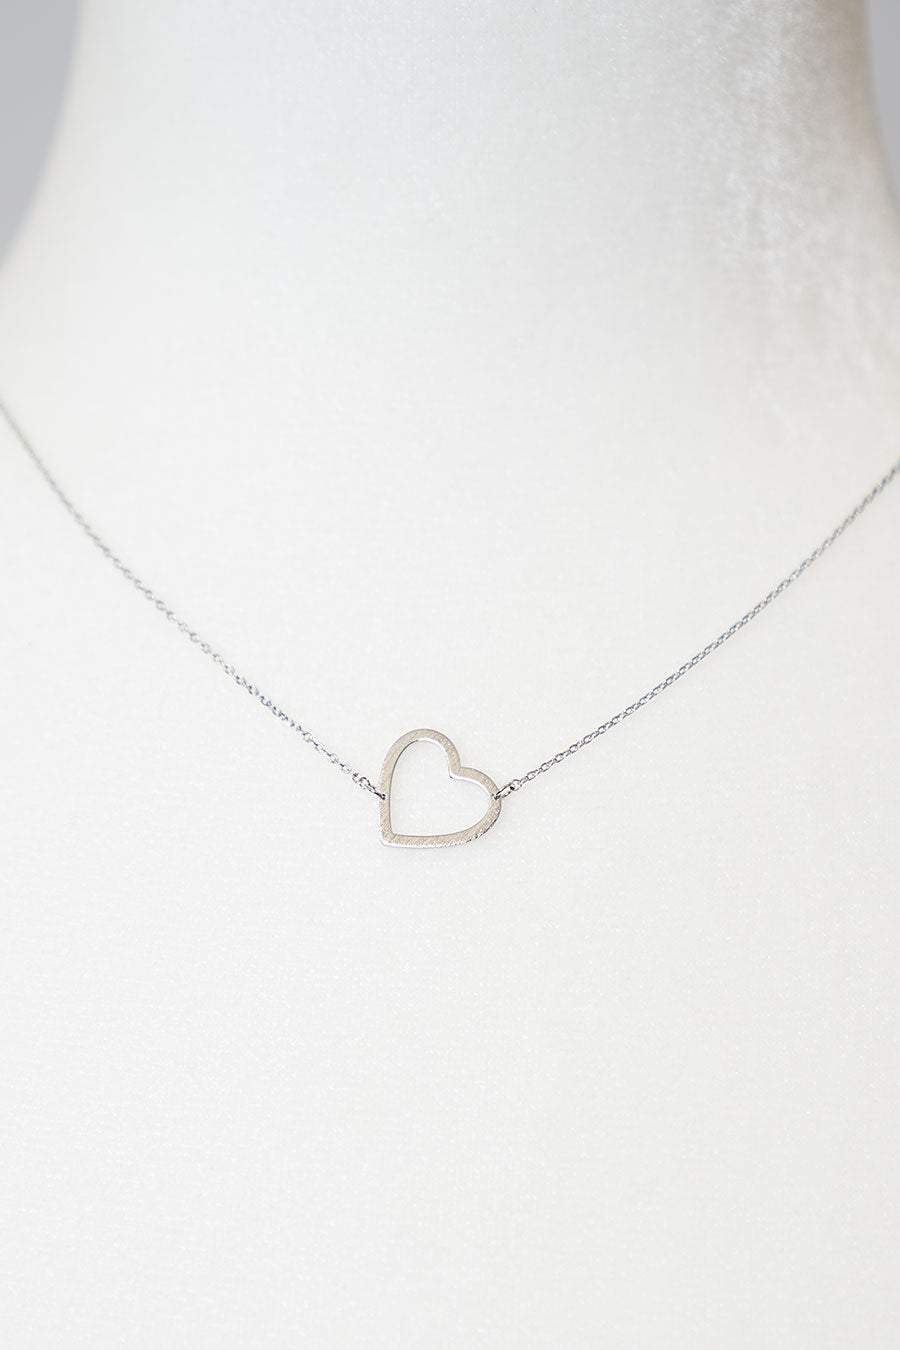 Forever Yours Heart Shaped Necklace